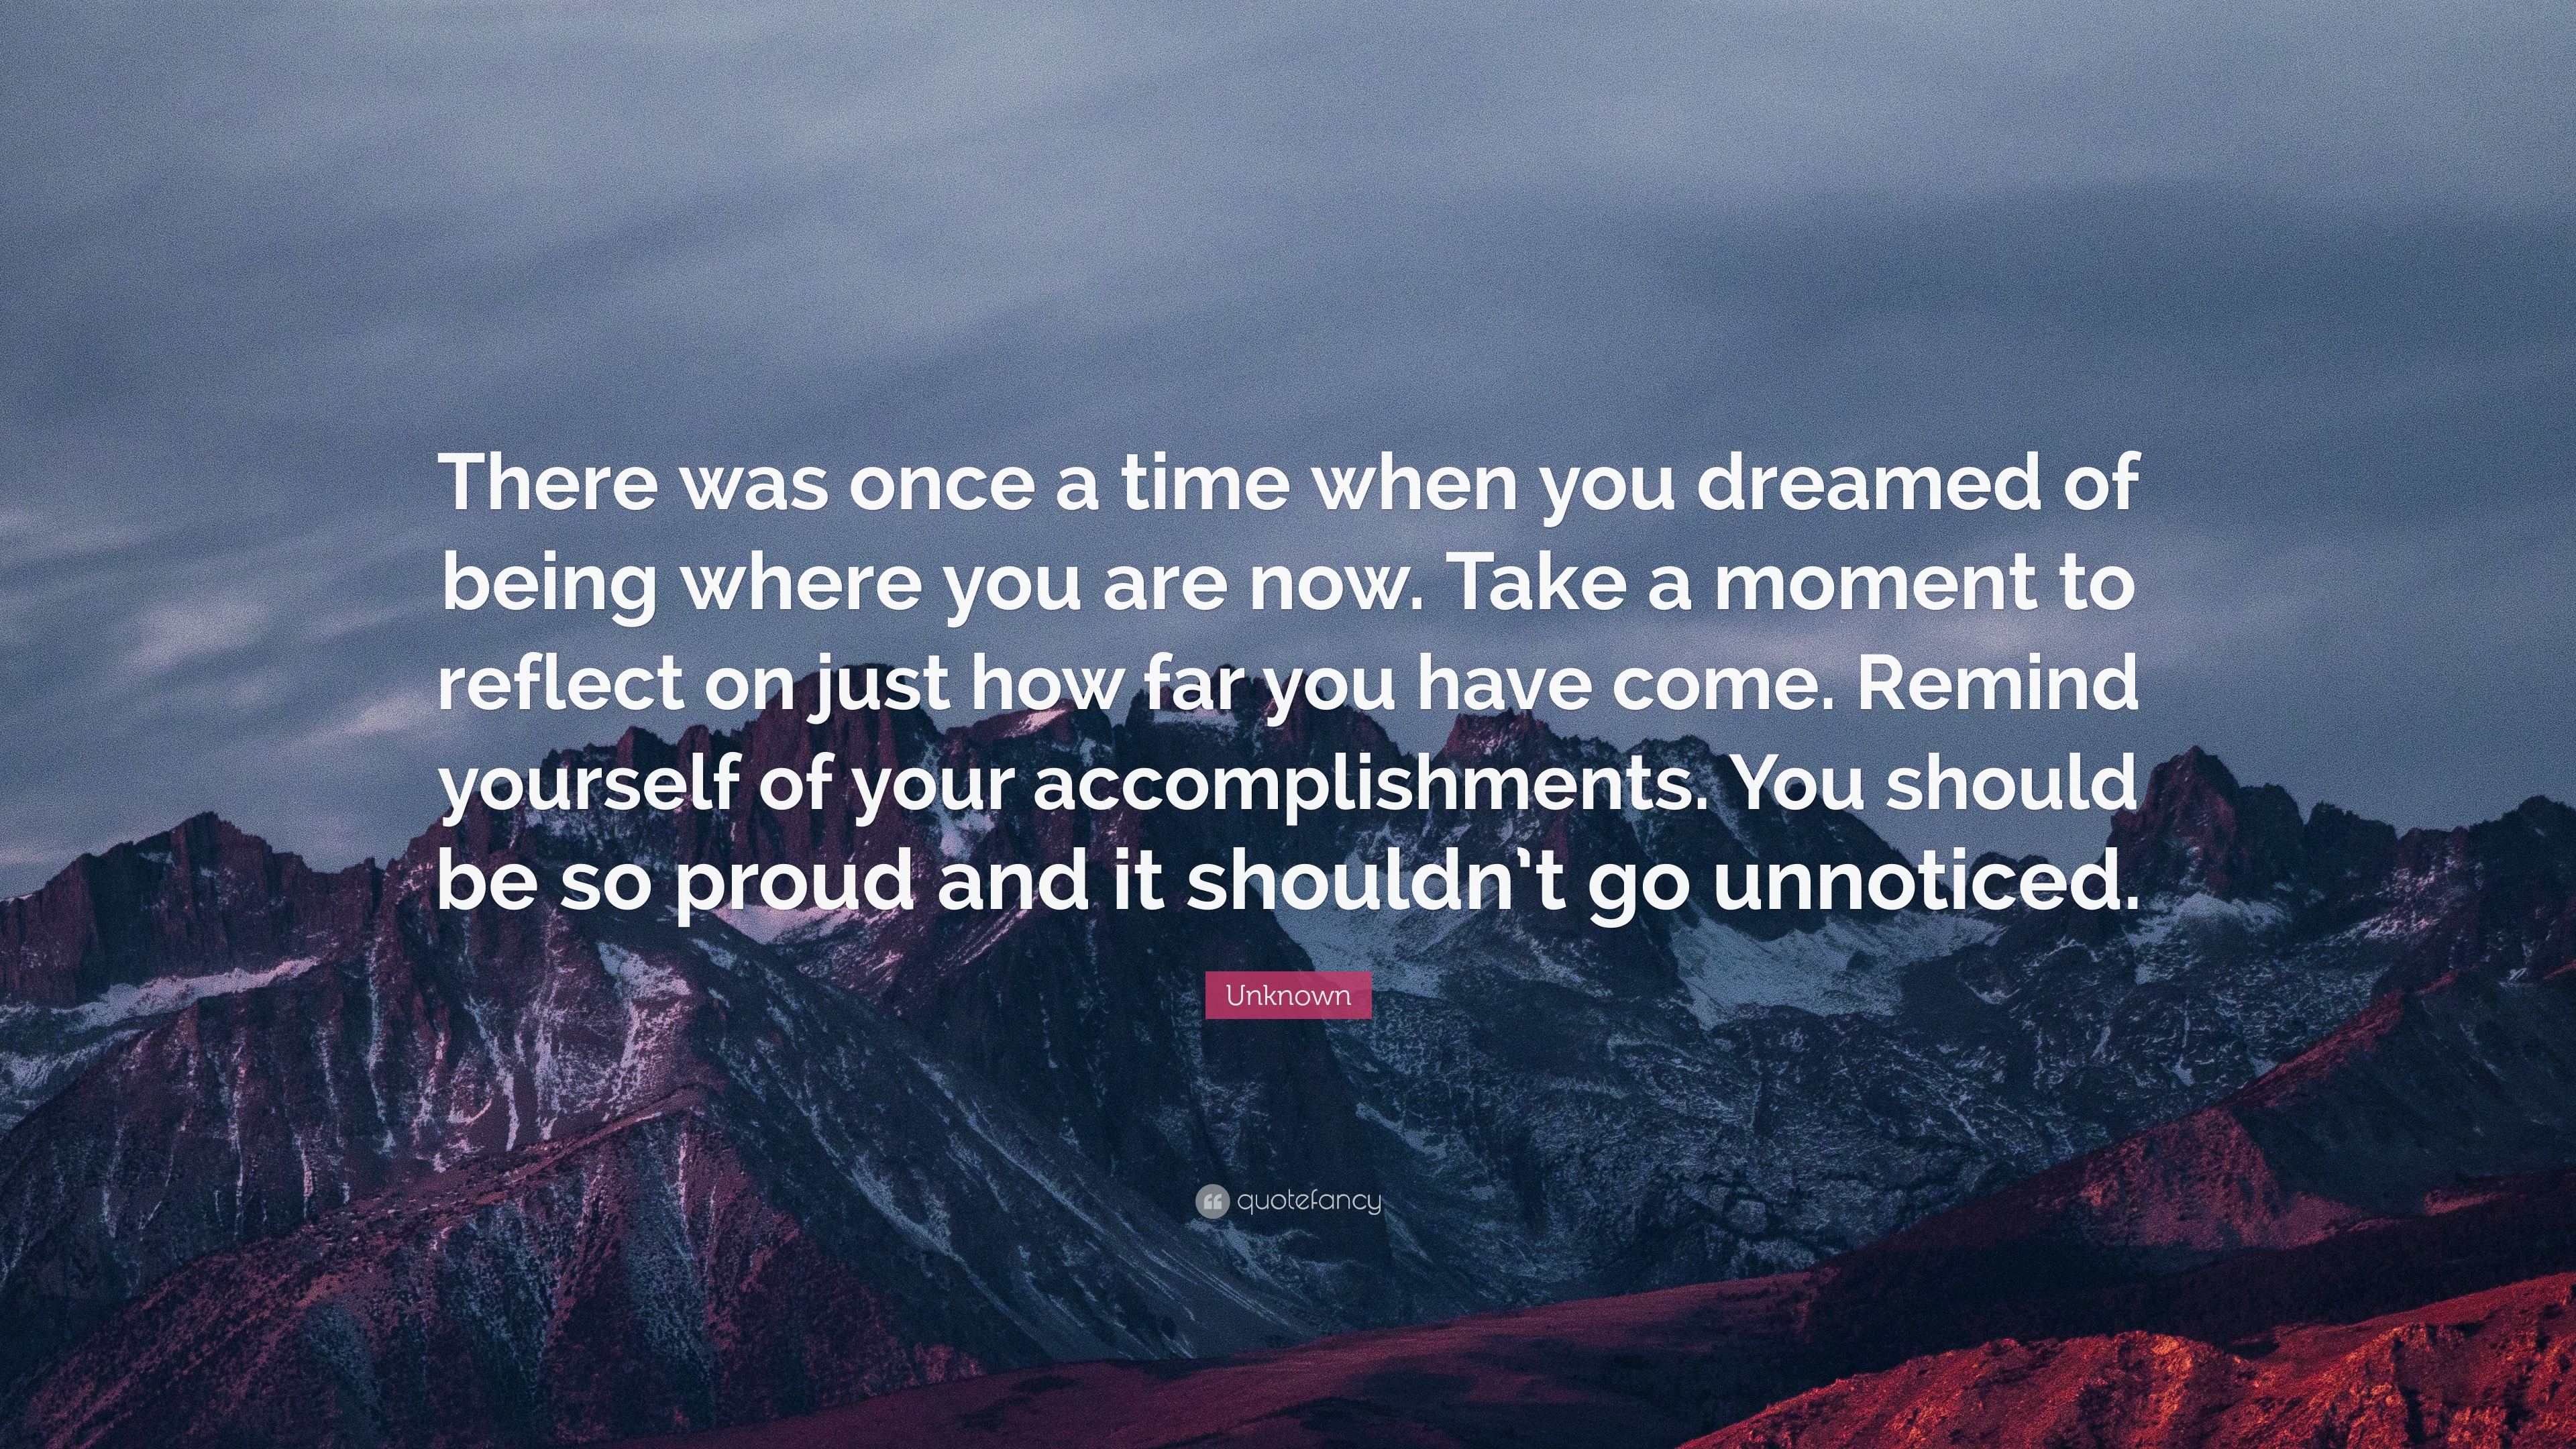 Unknown Quote: “There was once a time when you dreamed of being where ...